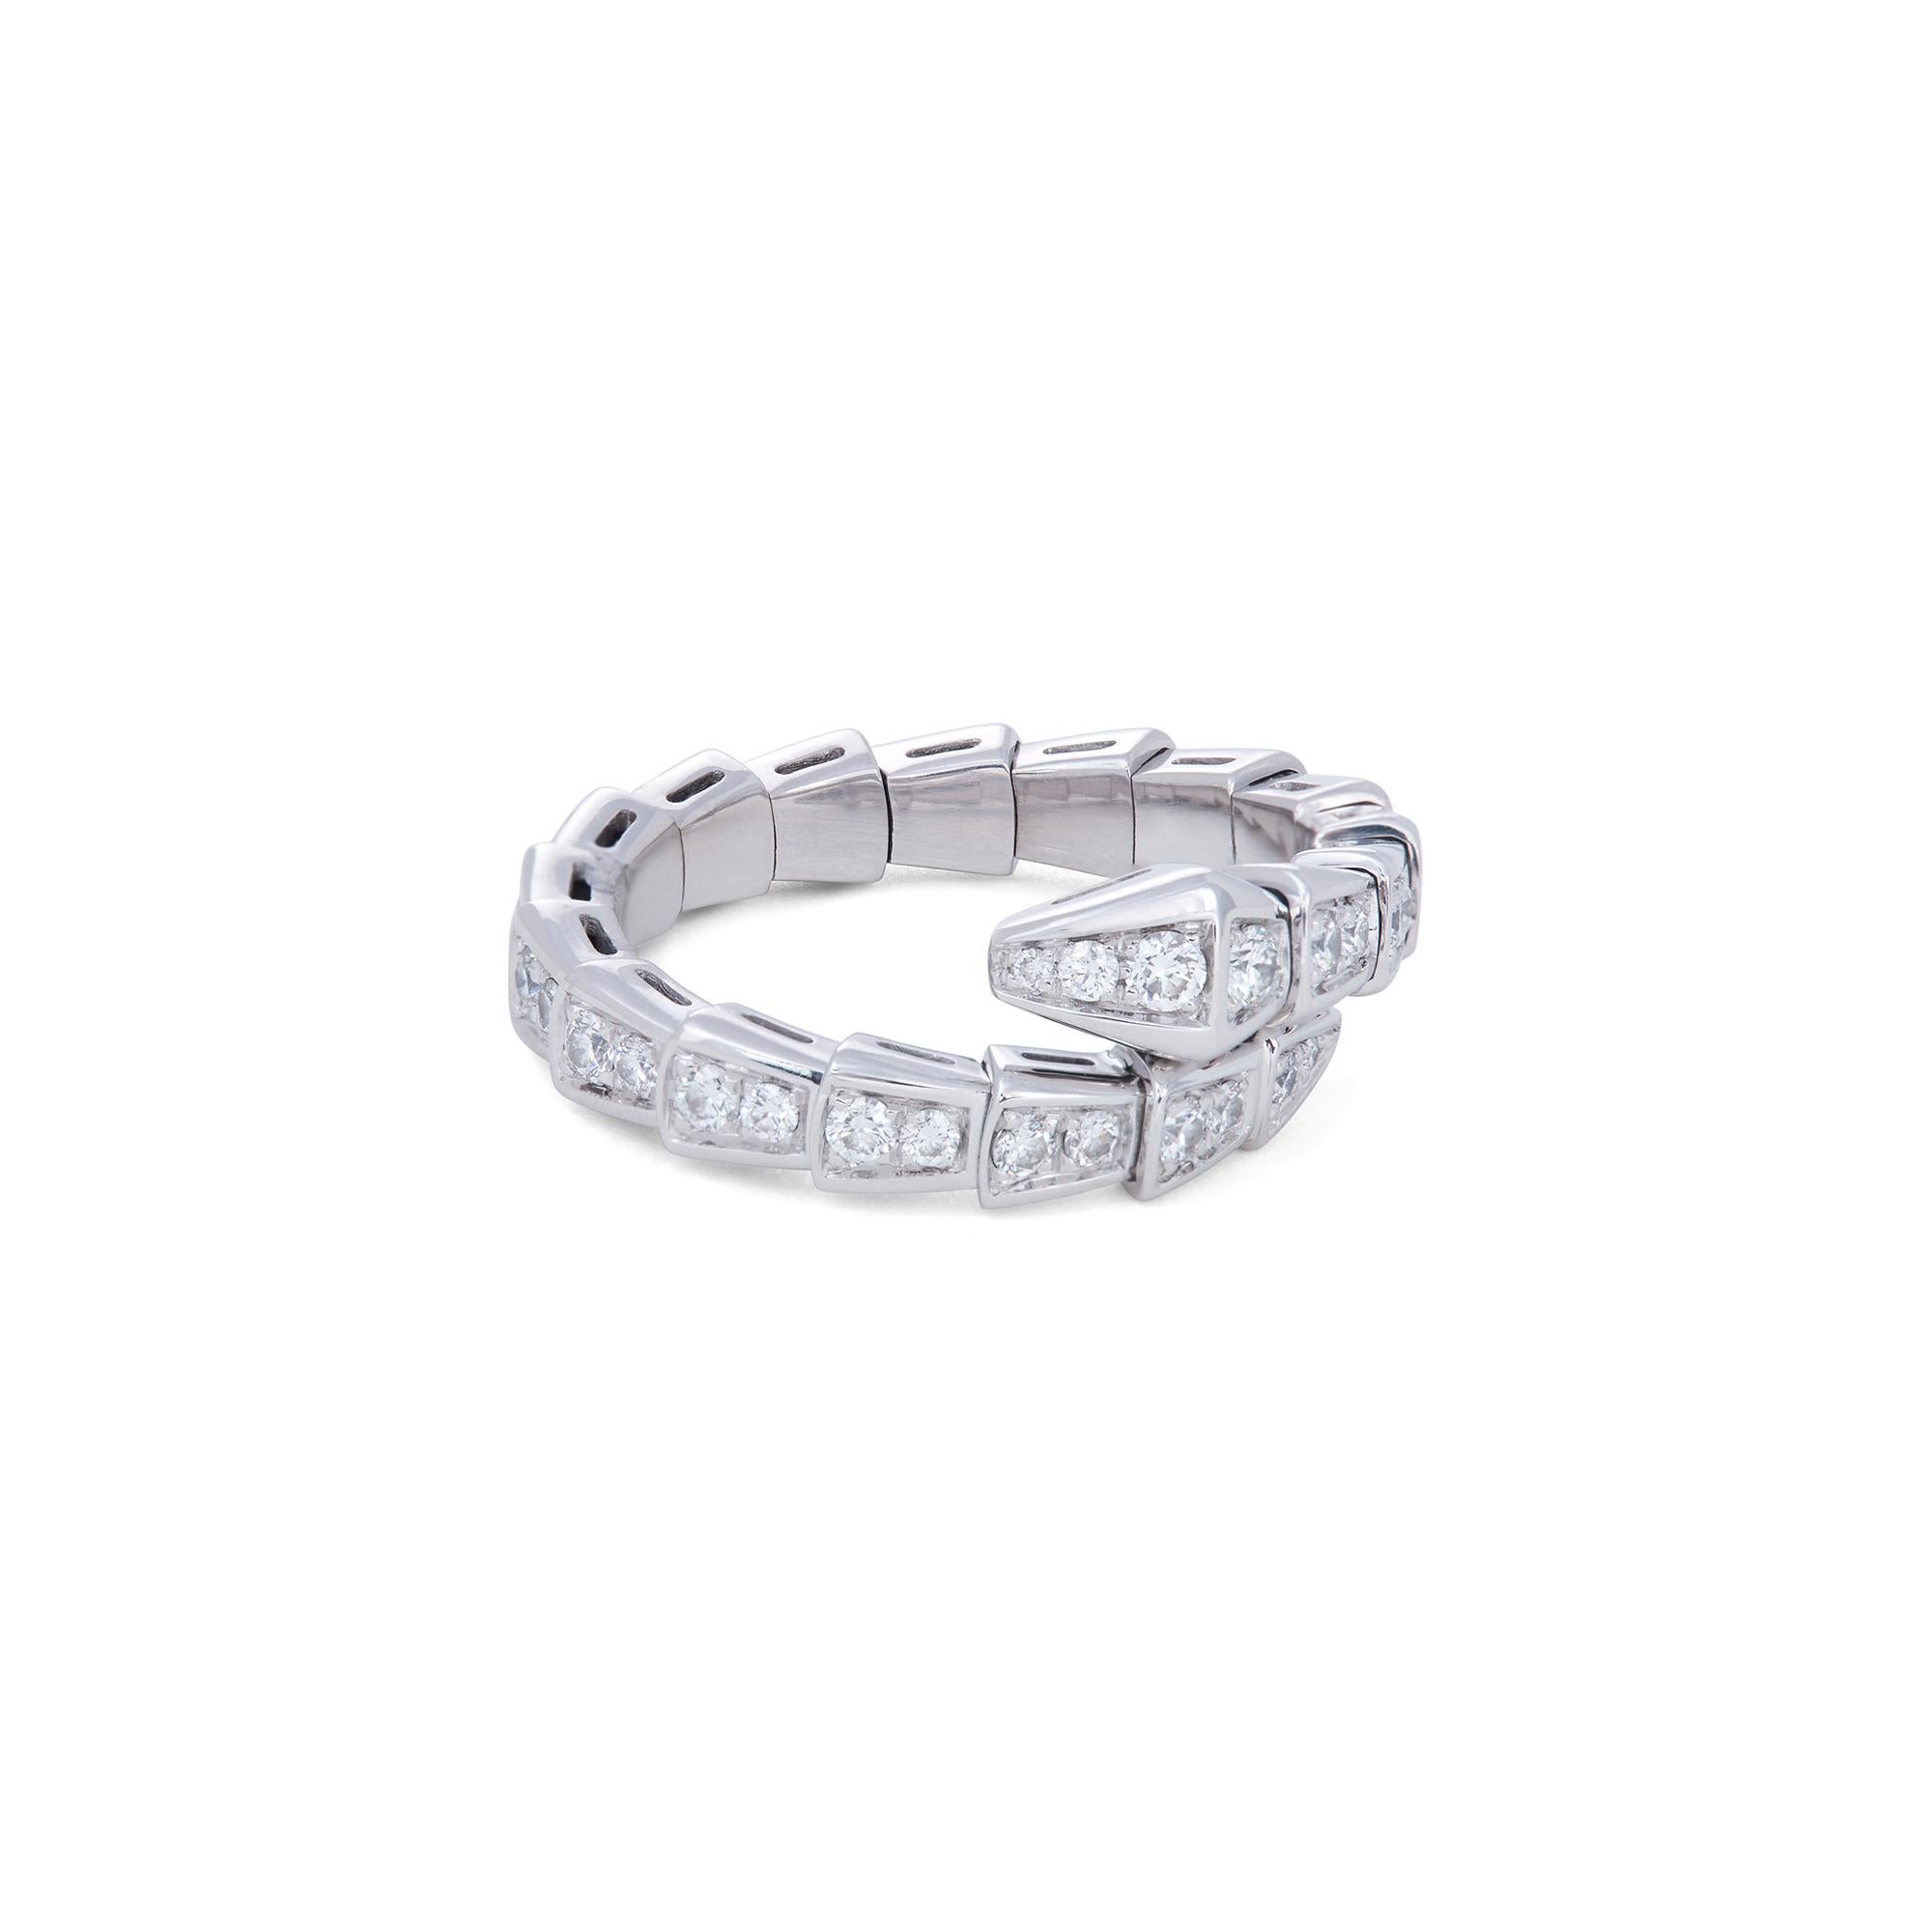 Authentic Bvlgari Serpenti Viper ring crafted in 18 karat white gold. The serpentine design coils around the finger and features pavé set diamonds of an estimated 0.66 total carats on the head and scales. Size L, will fit sizes 7-7 3/4. Signed